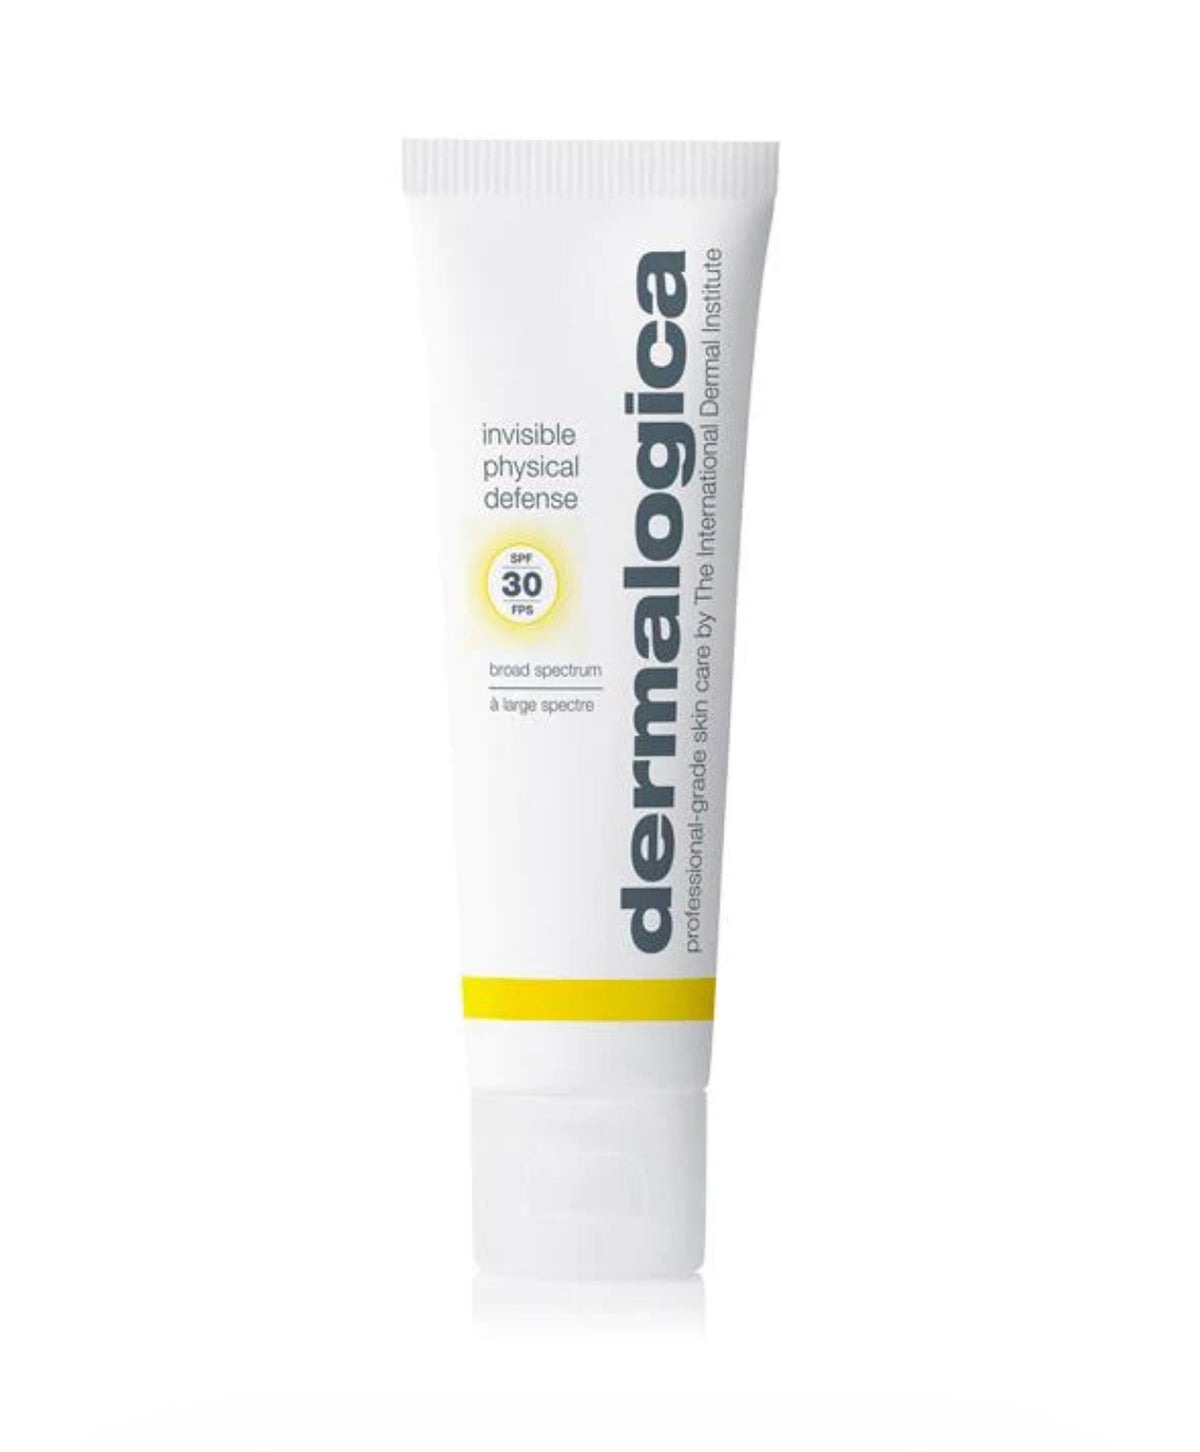 Sunscreen | Invisible Physical Defence SPF30 - Dermalogica